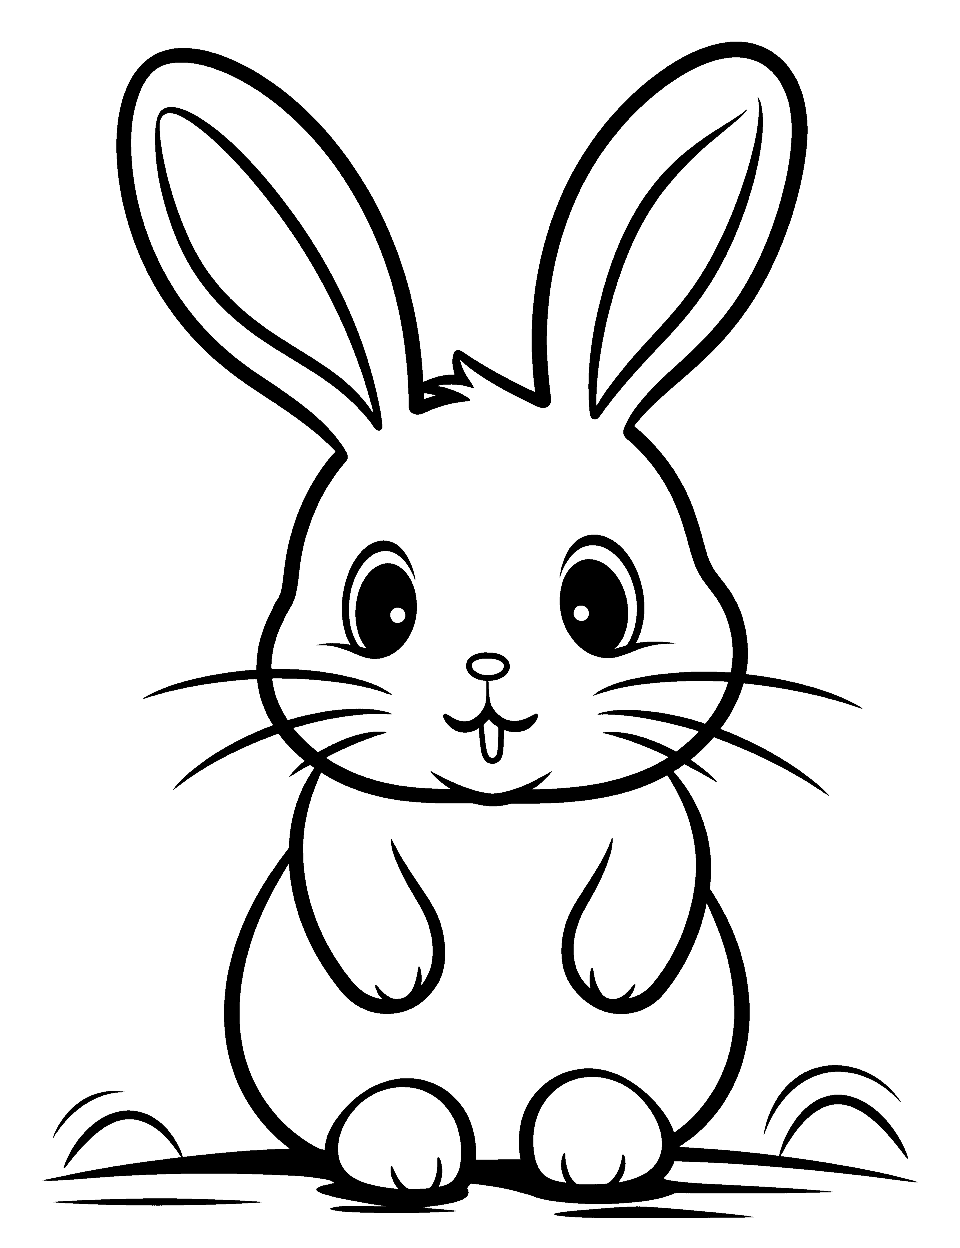 Simple Bunny Outline Coloring Page - A basic and easy outline of a bunny, perfect for toddlers to fill in.